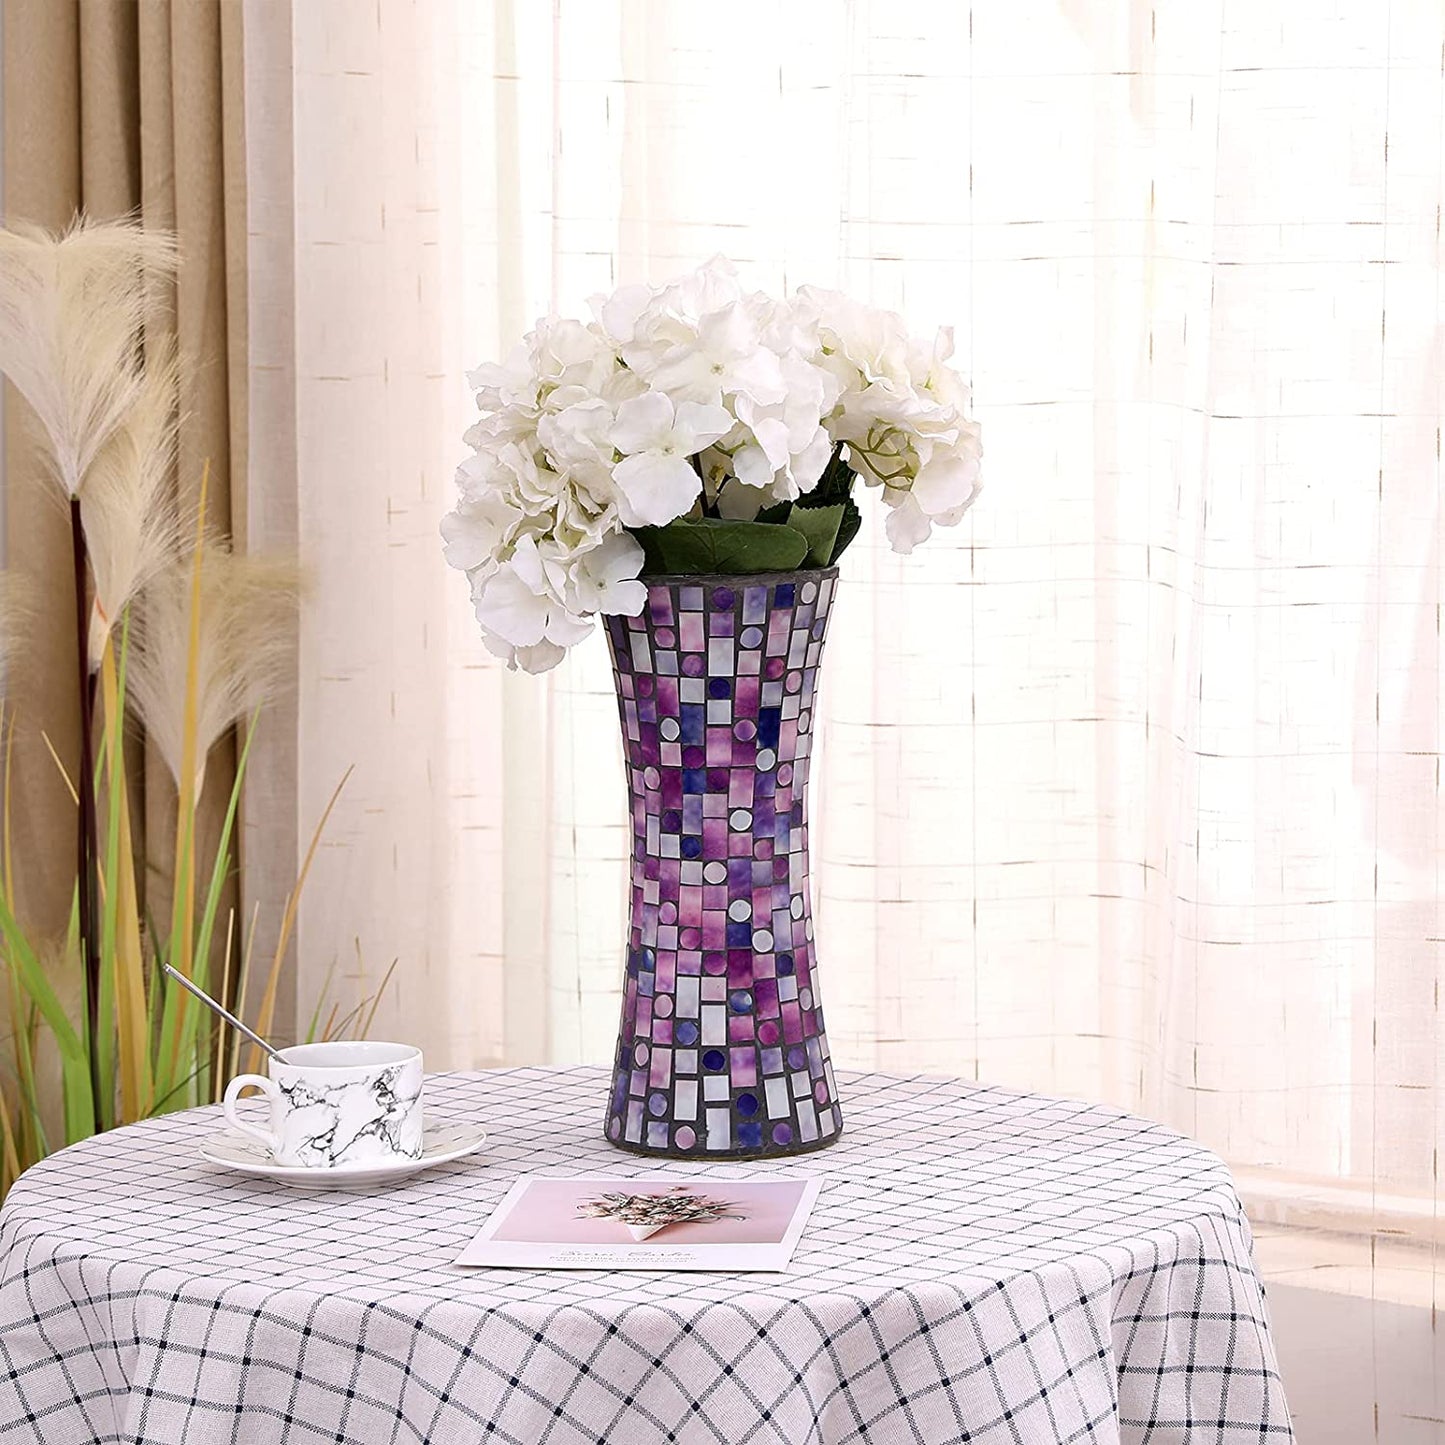 Large Glass Vase for Flower, Flowers Vase Mosaic Handmade Colorful Decorative Vase for Home Decor, Office, Wedding,11.6 Inch Tall, Purple